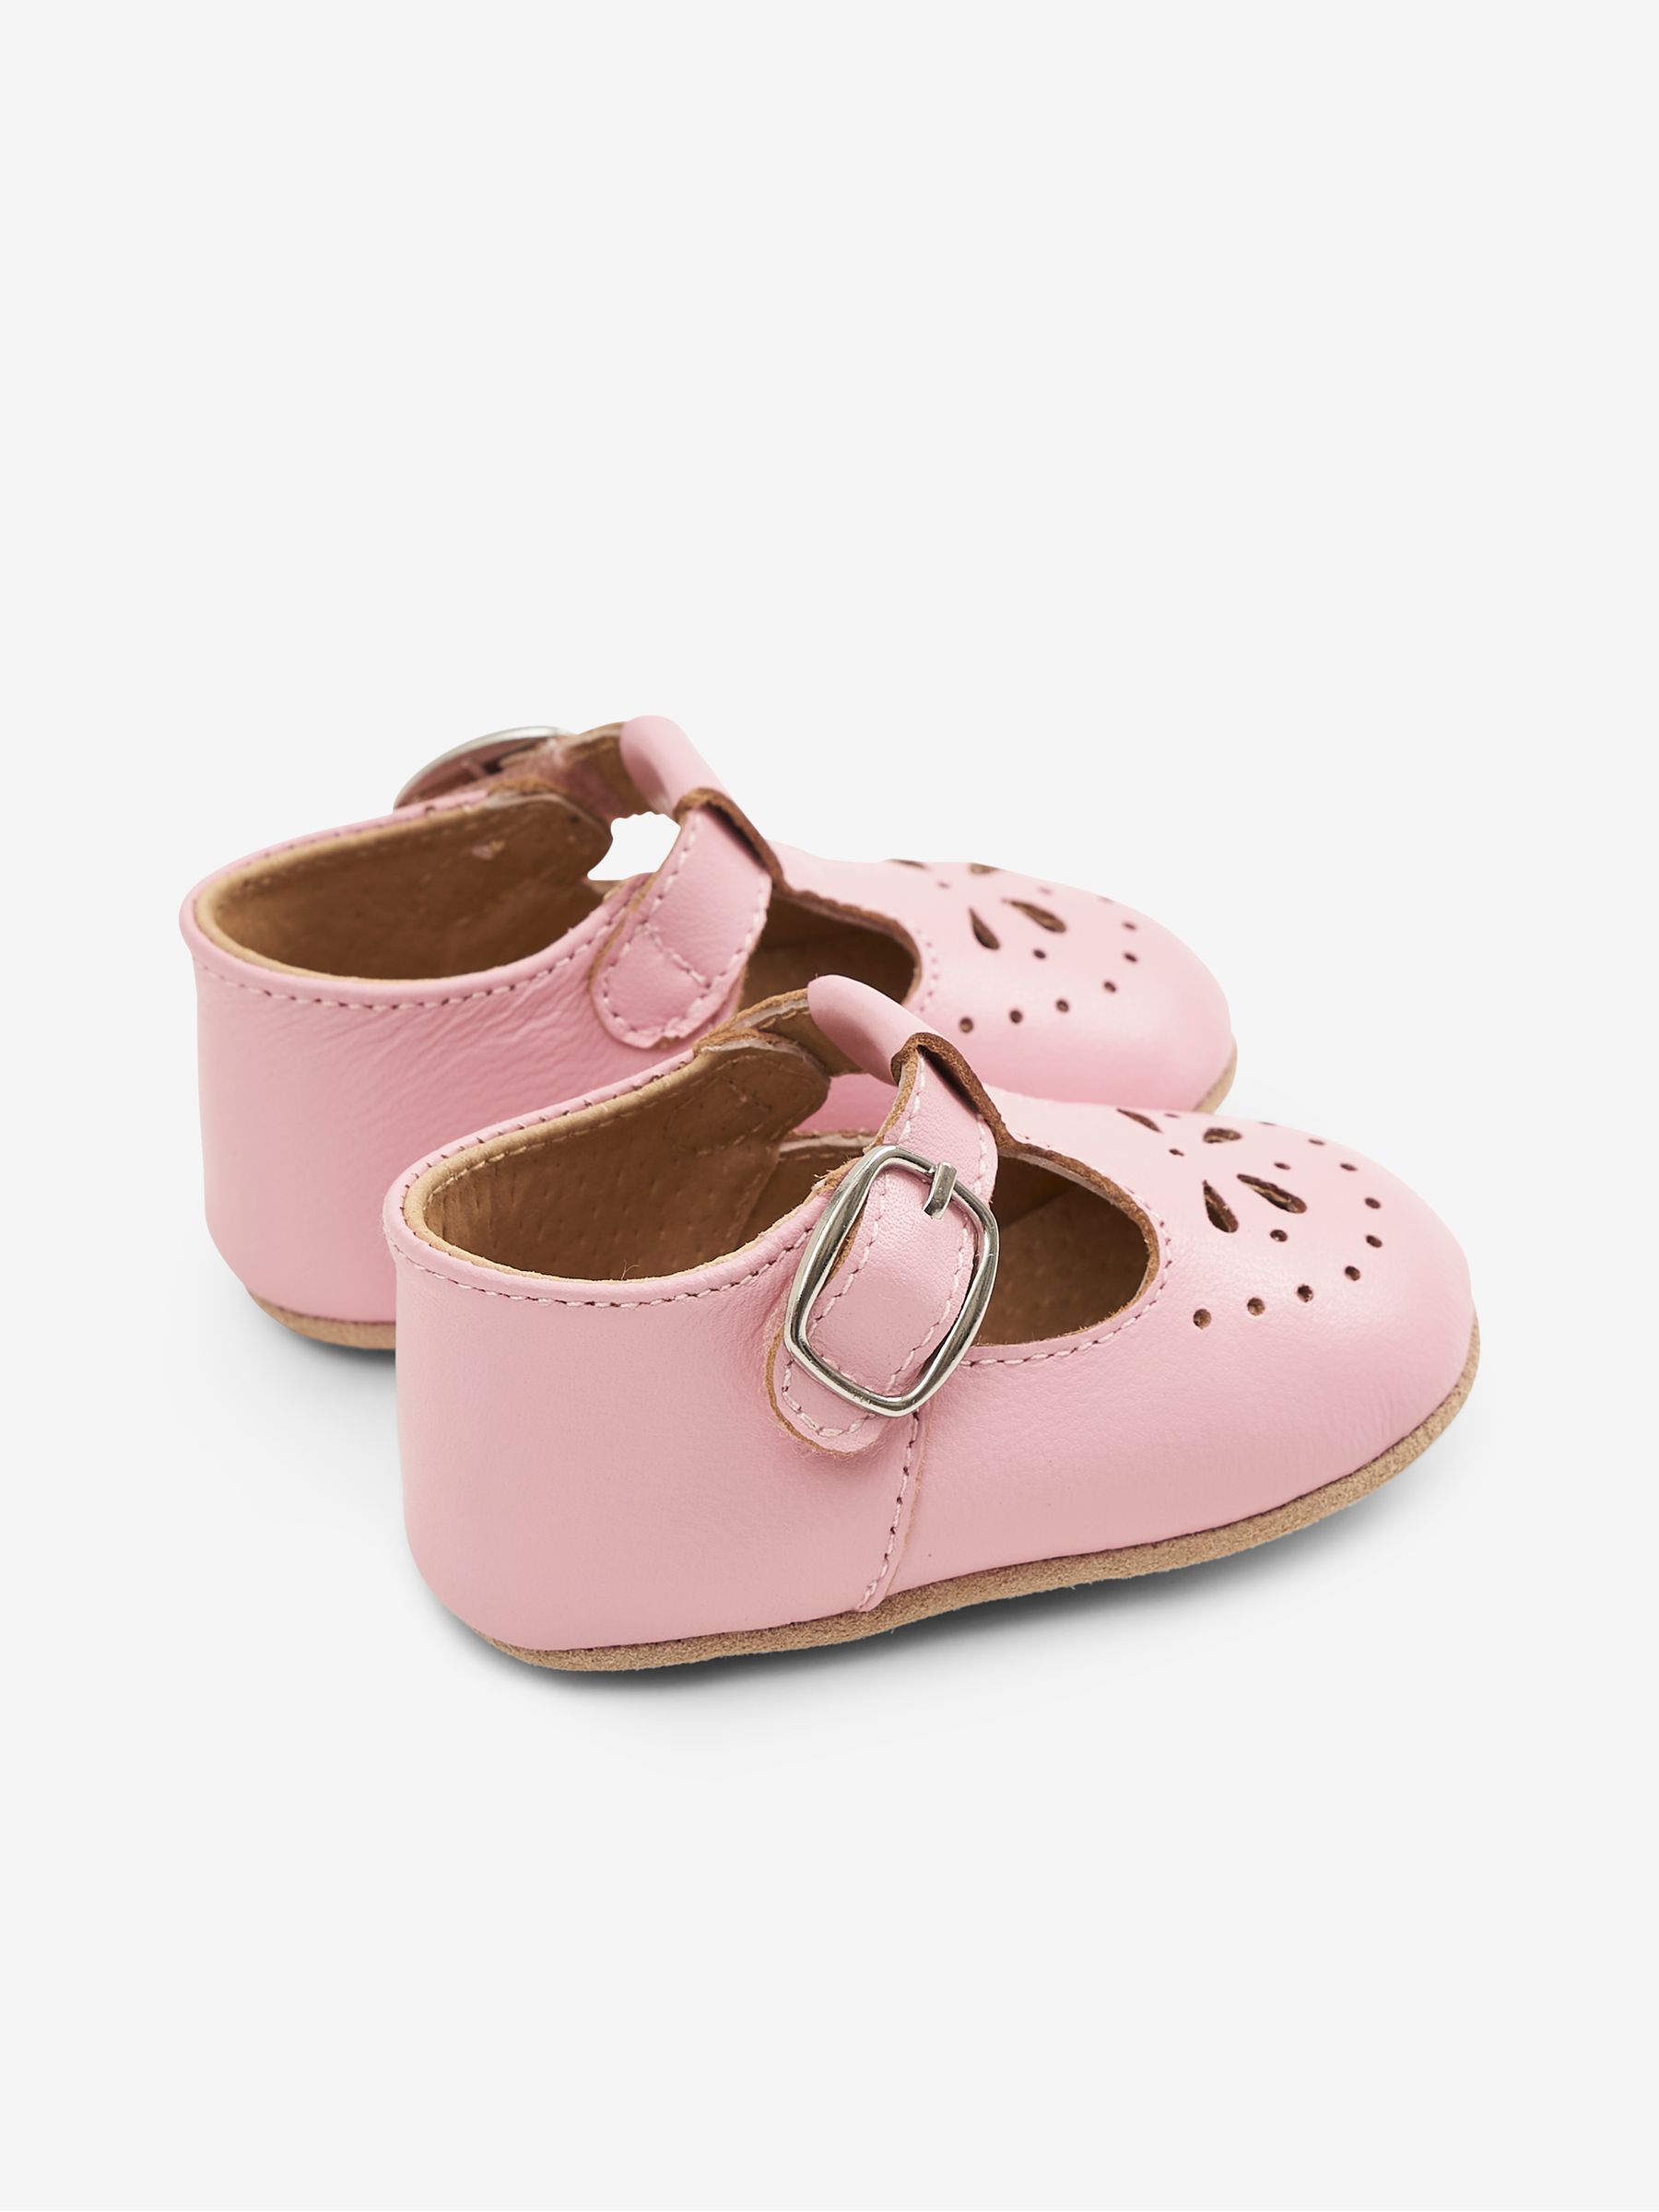 Buy Pink Classic Leather Pre-Walker Shoes from the JoJo Maman Bébé UK ...